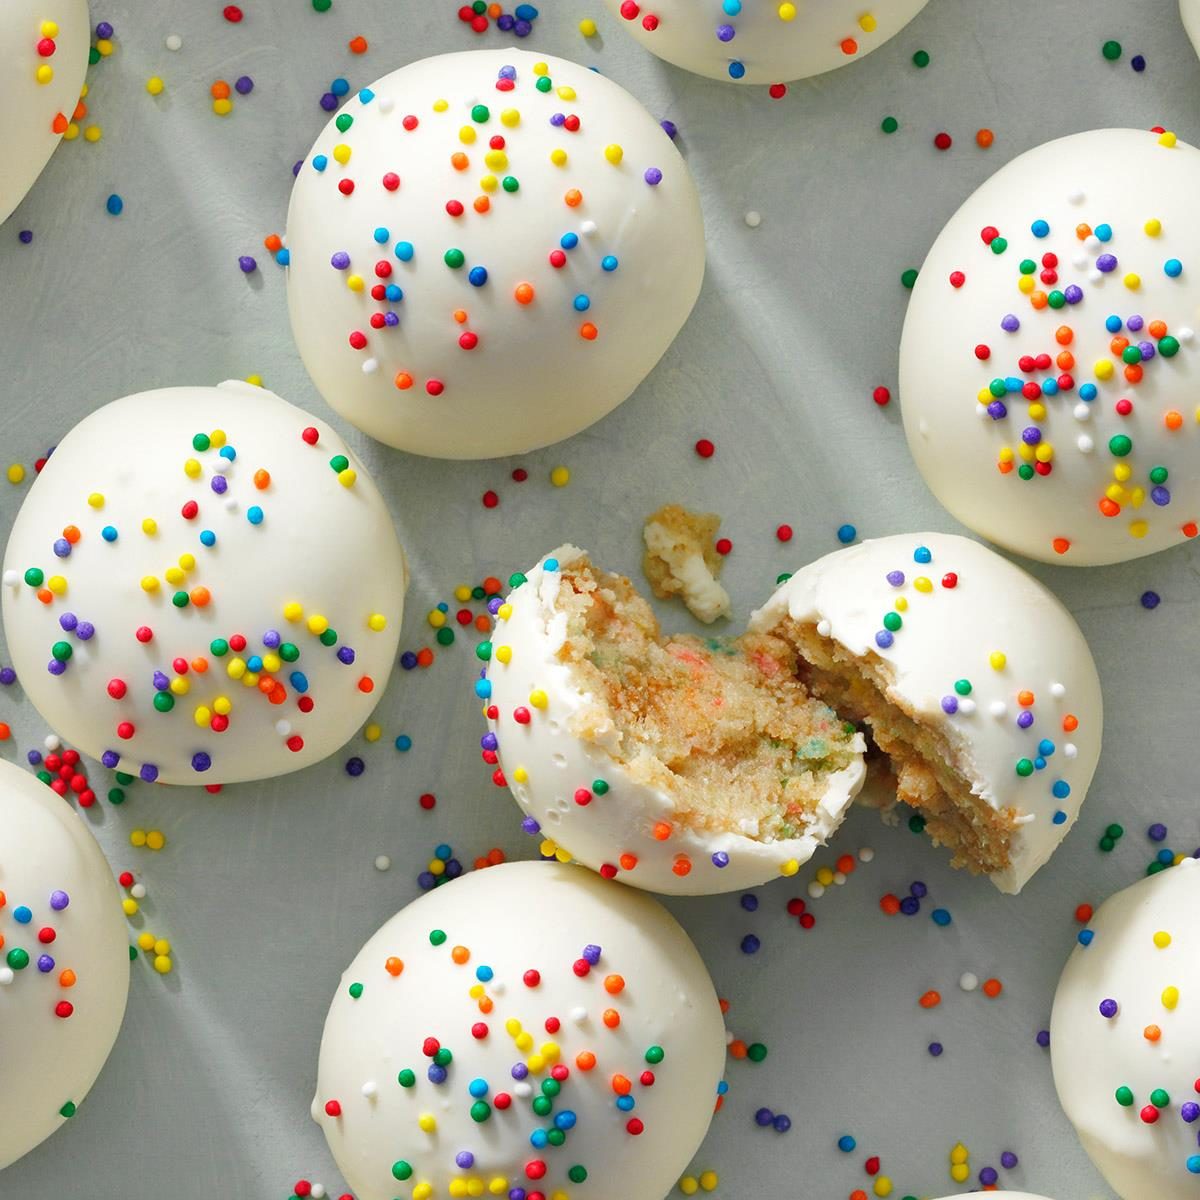 Cake Balls Recipe (Easy!) - Cookies for Days